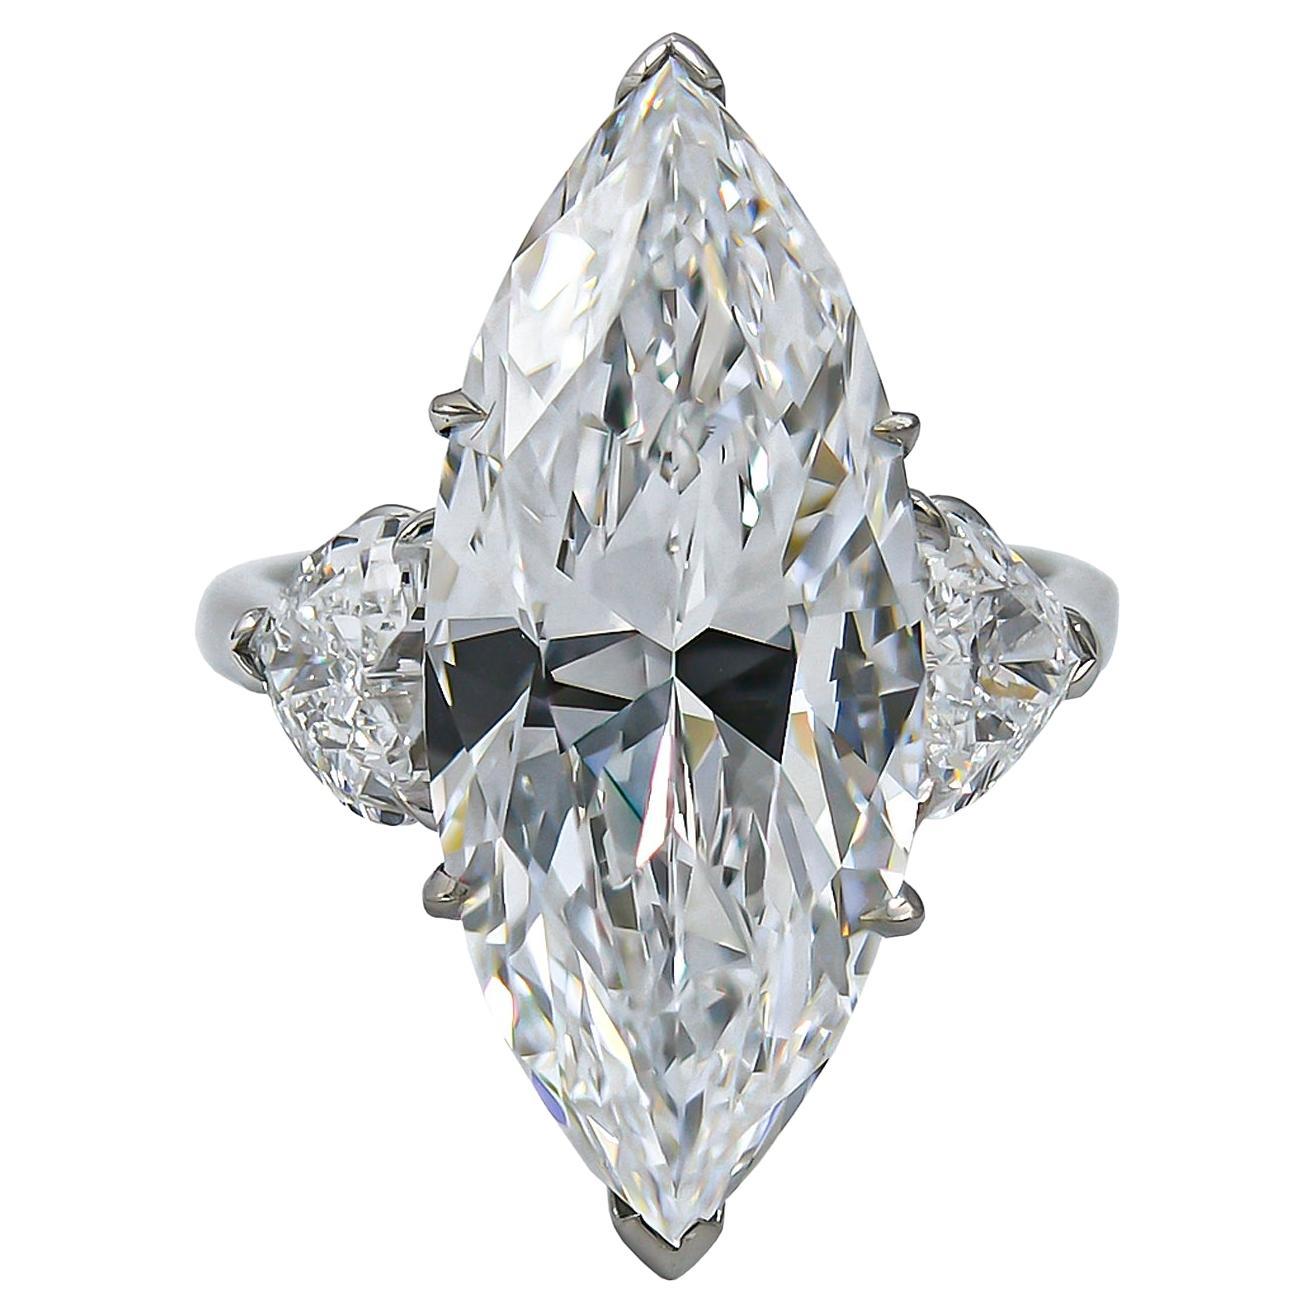 Adler GIA Certified 10.04 Carat D Color Marquise Diamond Ring For Sale